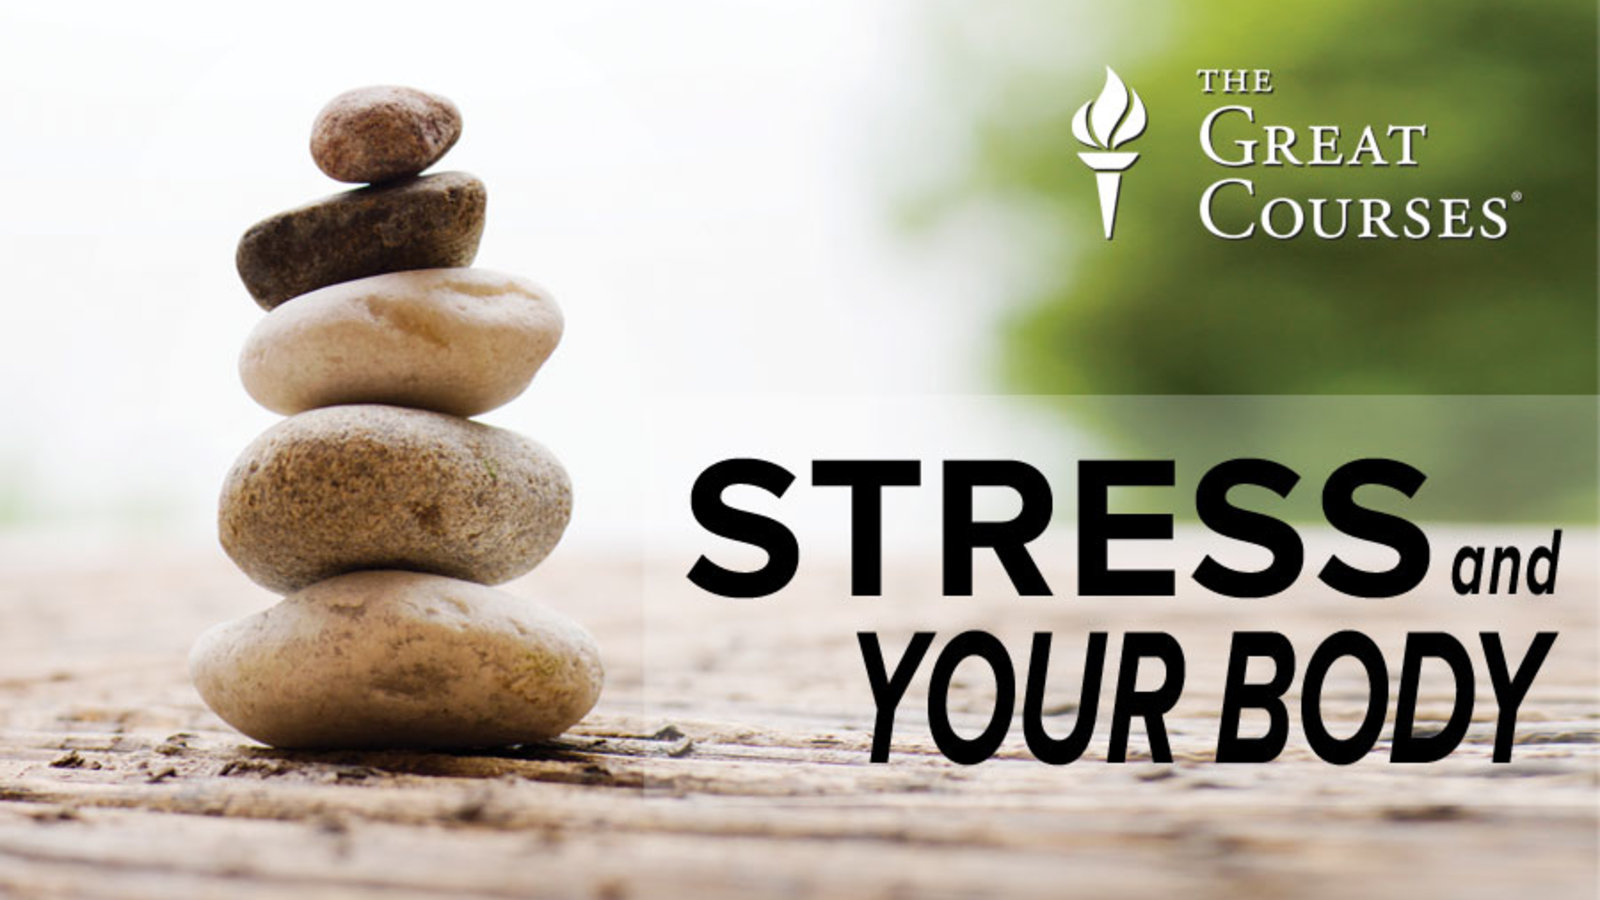 Stress on your body, stress relief, Kanopy, Great Courses, Jacksonville Public Library